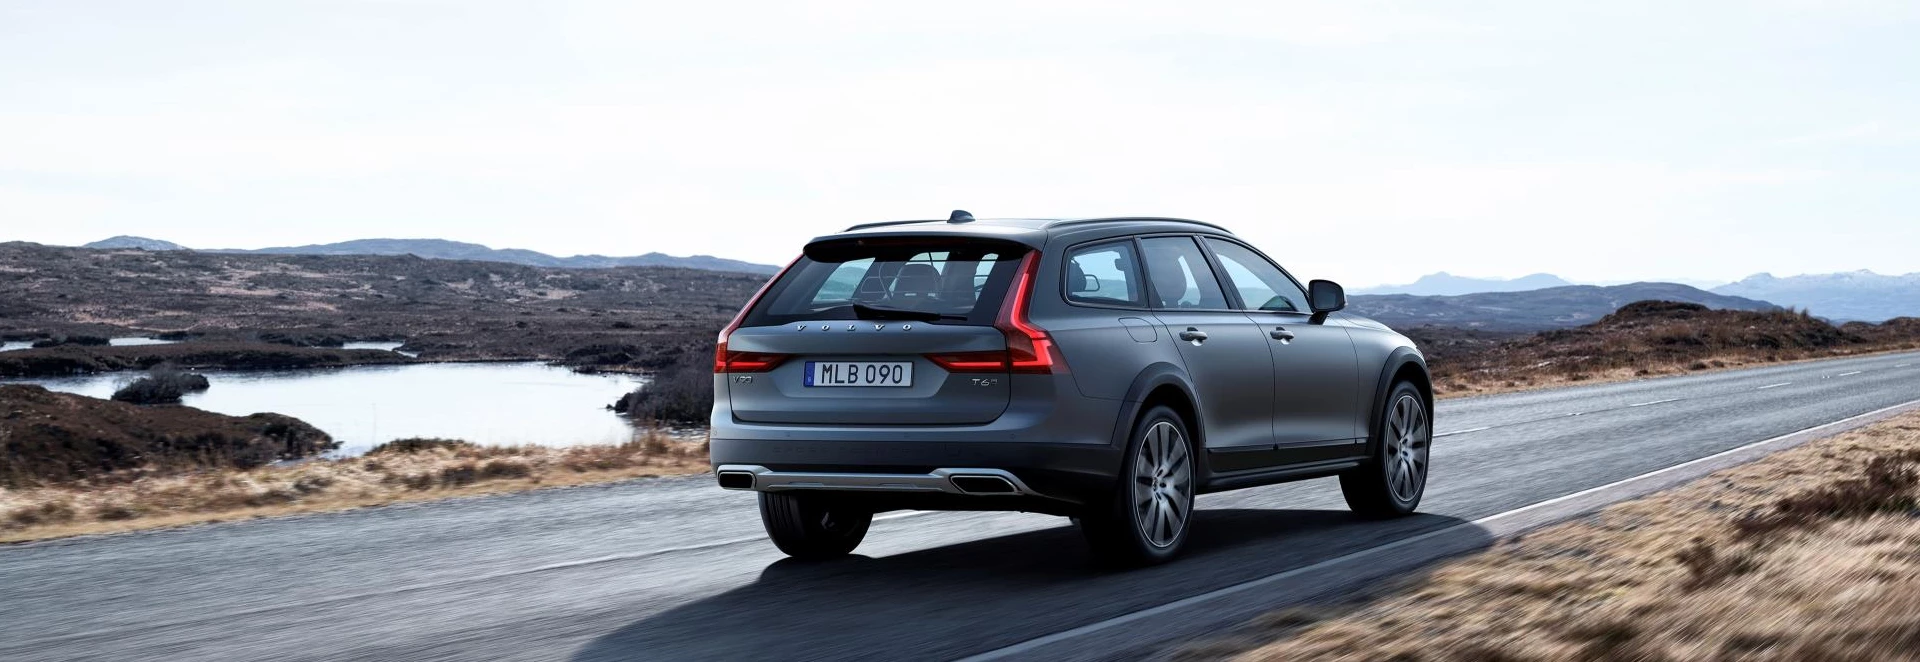 Volvo V90 adds tougher Cross Country edition